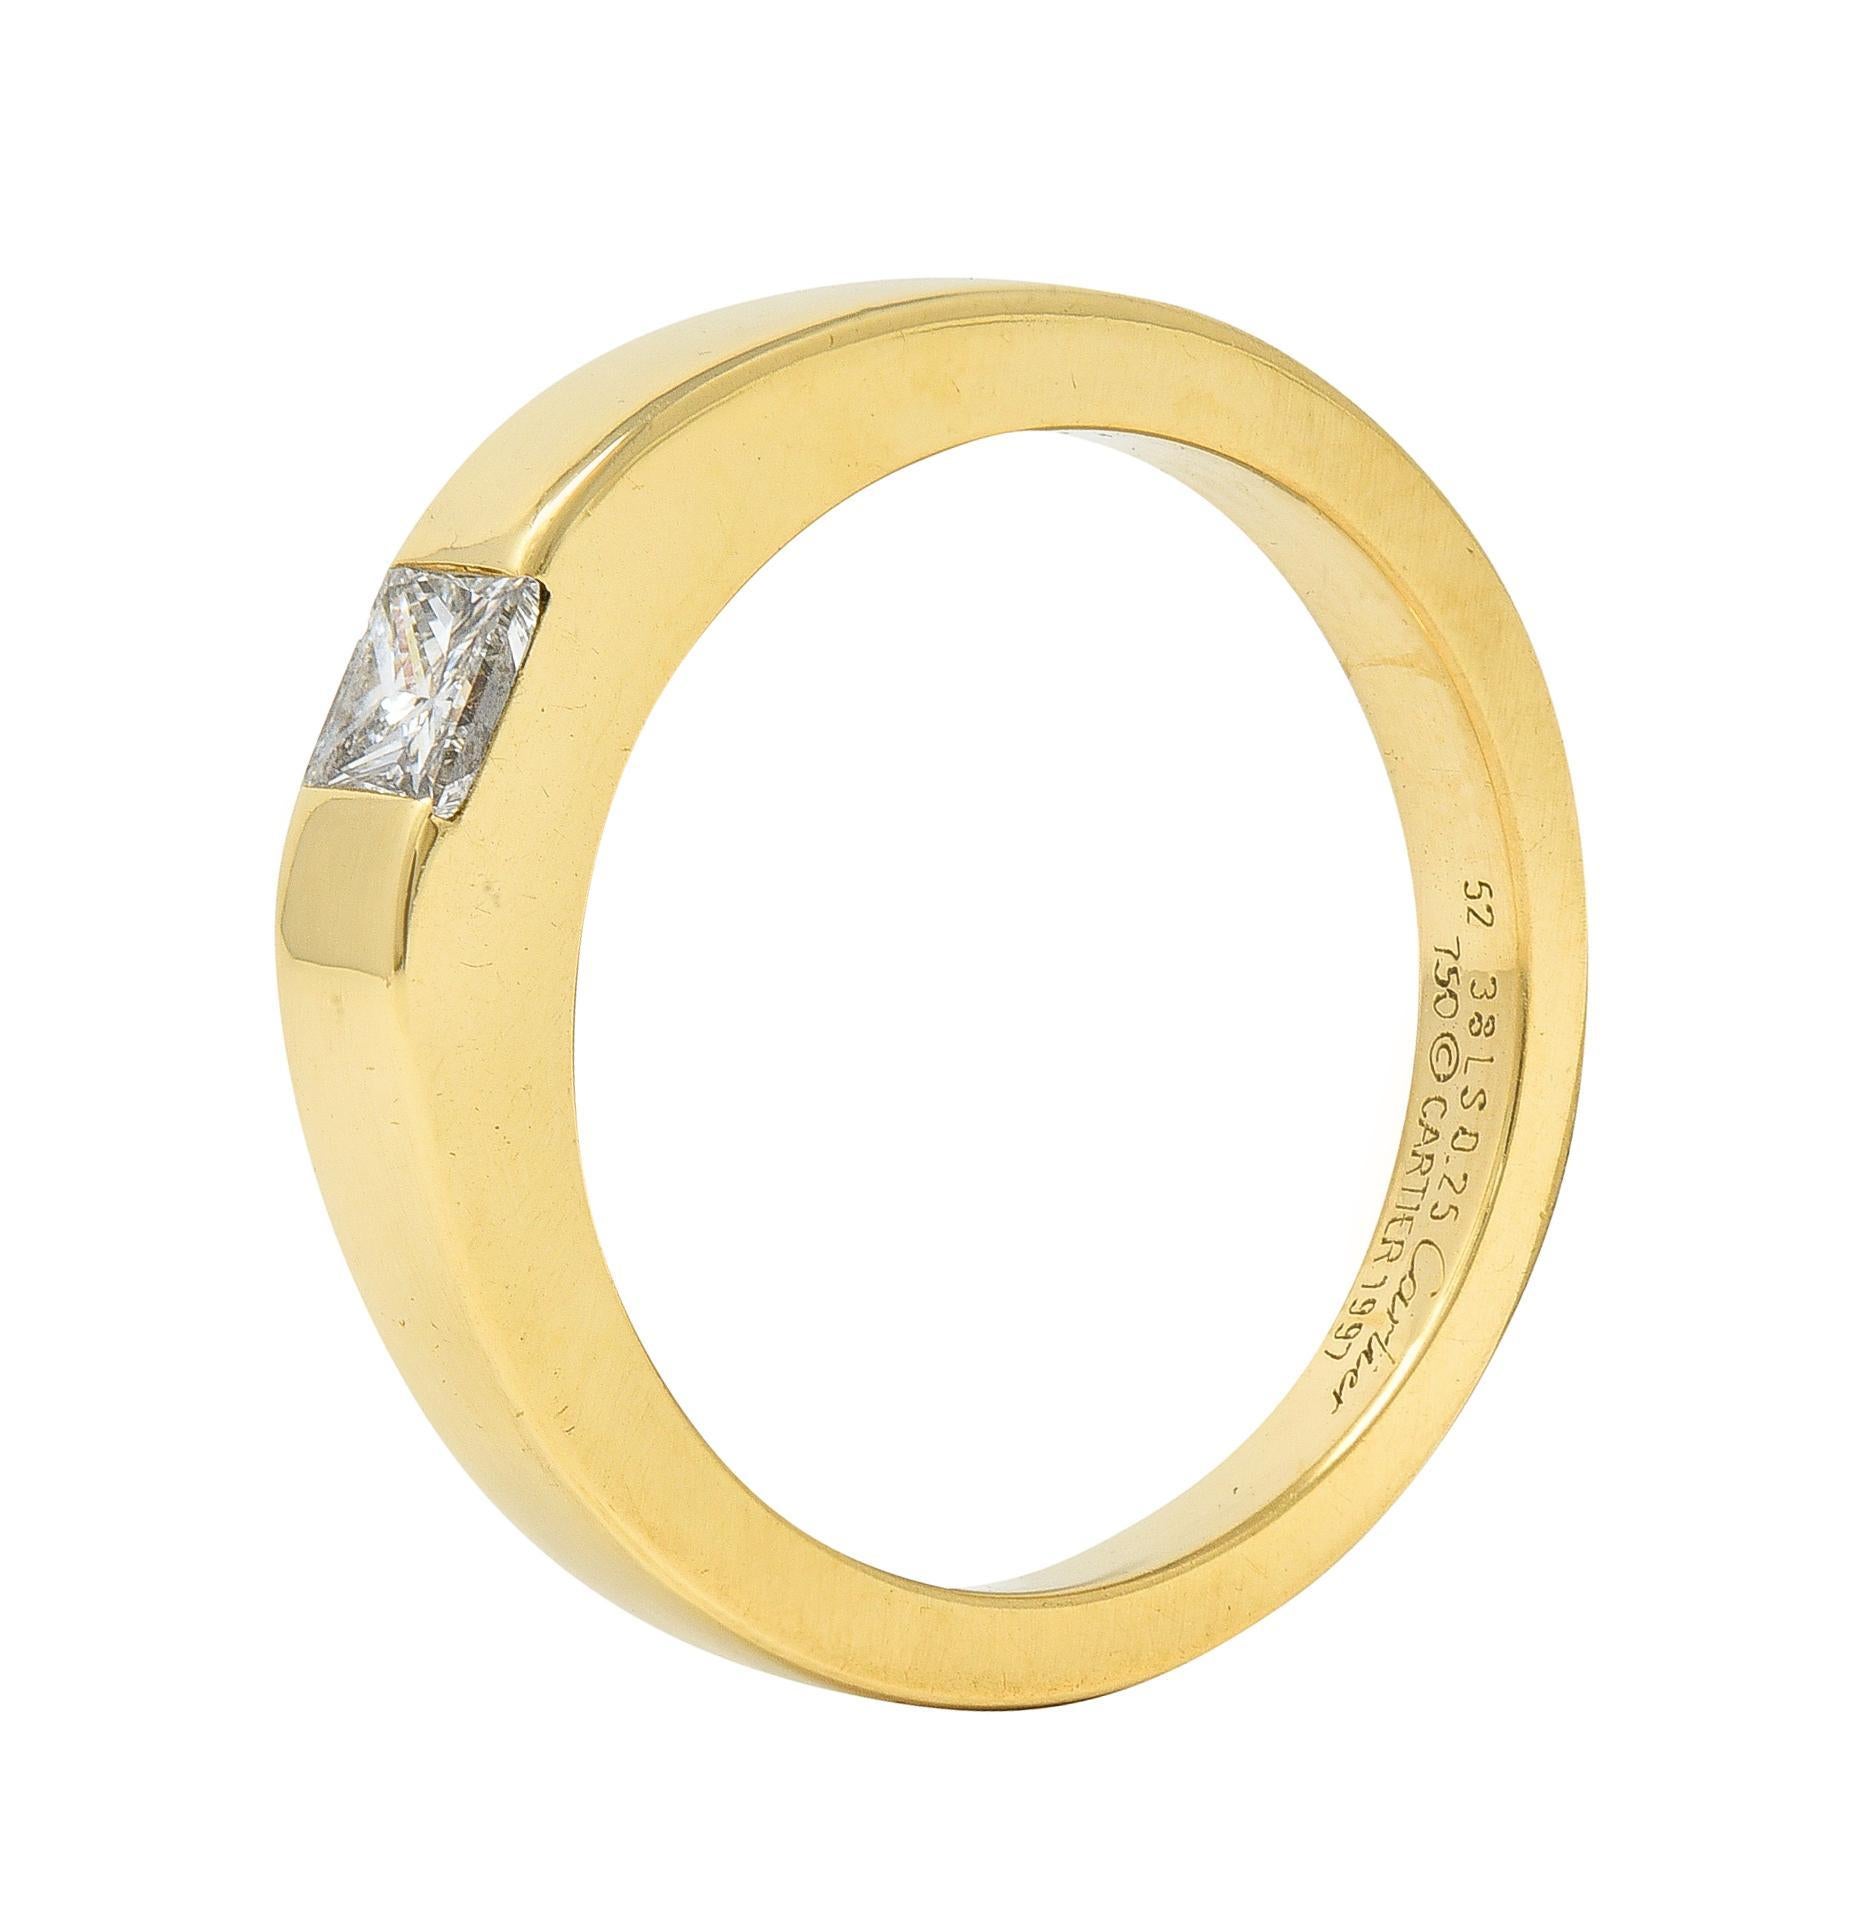 Featuring a princess cut diamond weighing 0.25 carat - G color with VS1 clarity
Tension set in sleek, high polished band 
Stamped with French hallmarks for 18 karat gold 
Inscribed with carat weight
Numbered and fully signed with maker's mark for